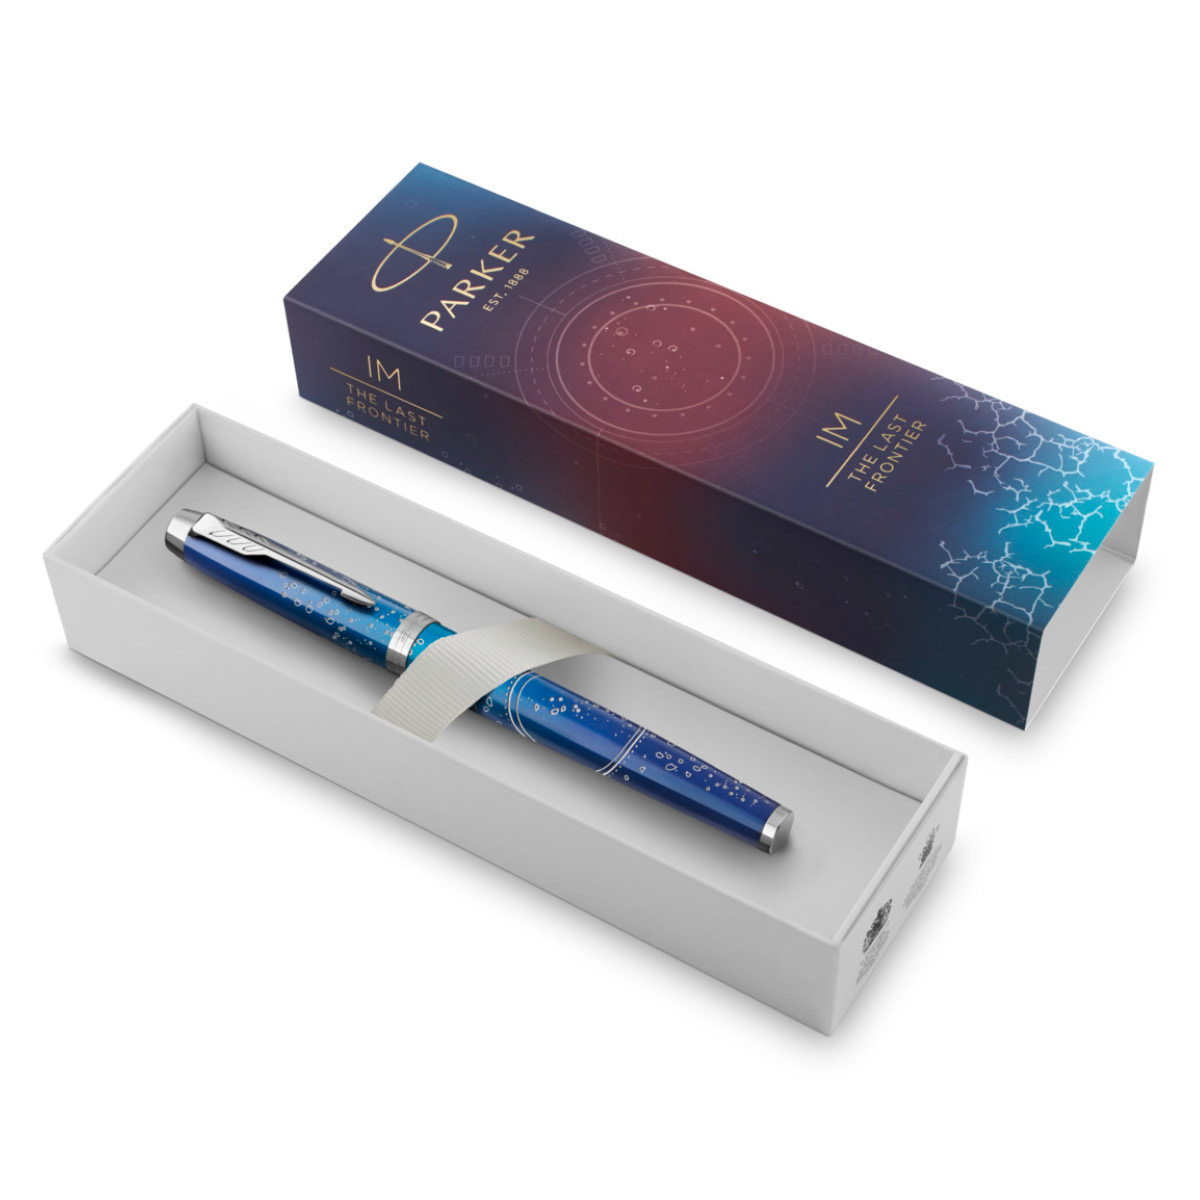 IM Submerge CT Rollerball in the group Pens / Fine Writing / Rollerball Pens at Pen Store (112671)